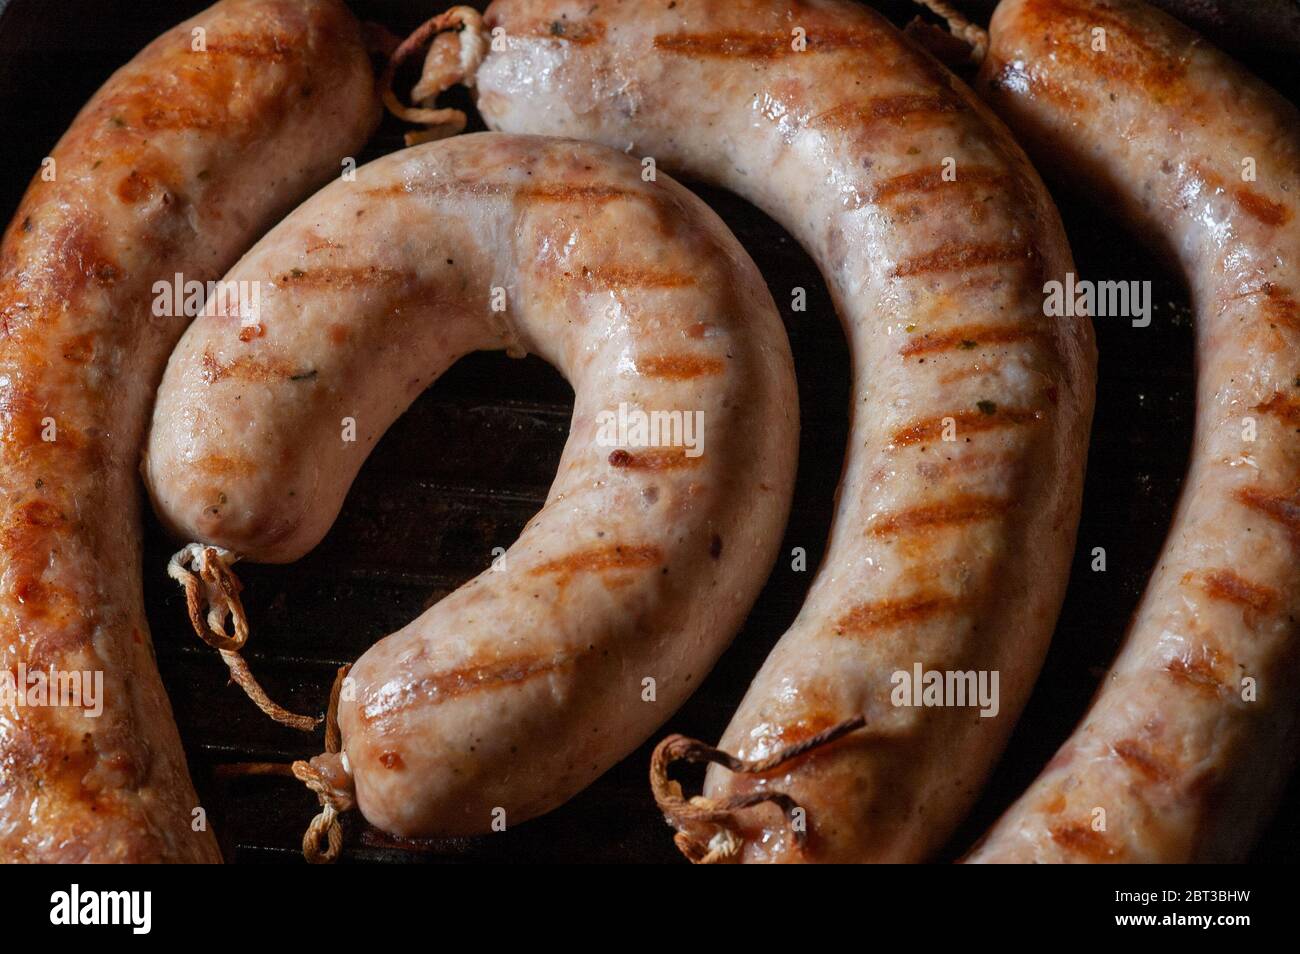 Fresh sausage on a barbecue grill. Grilled sausage. Meat dish food photography Stock Photo